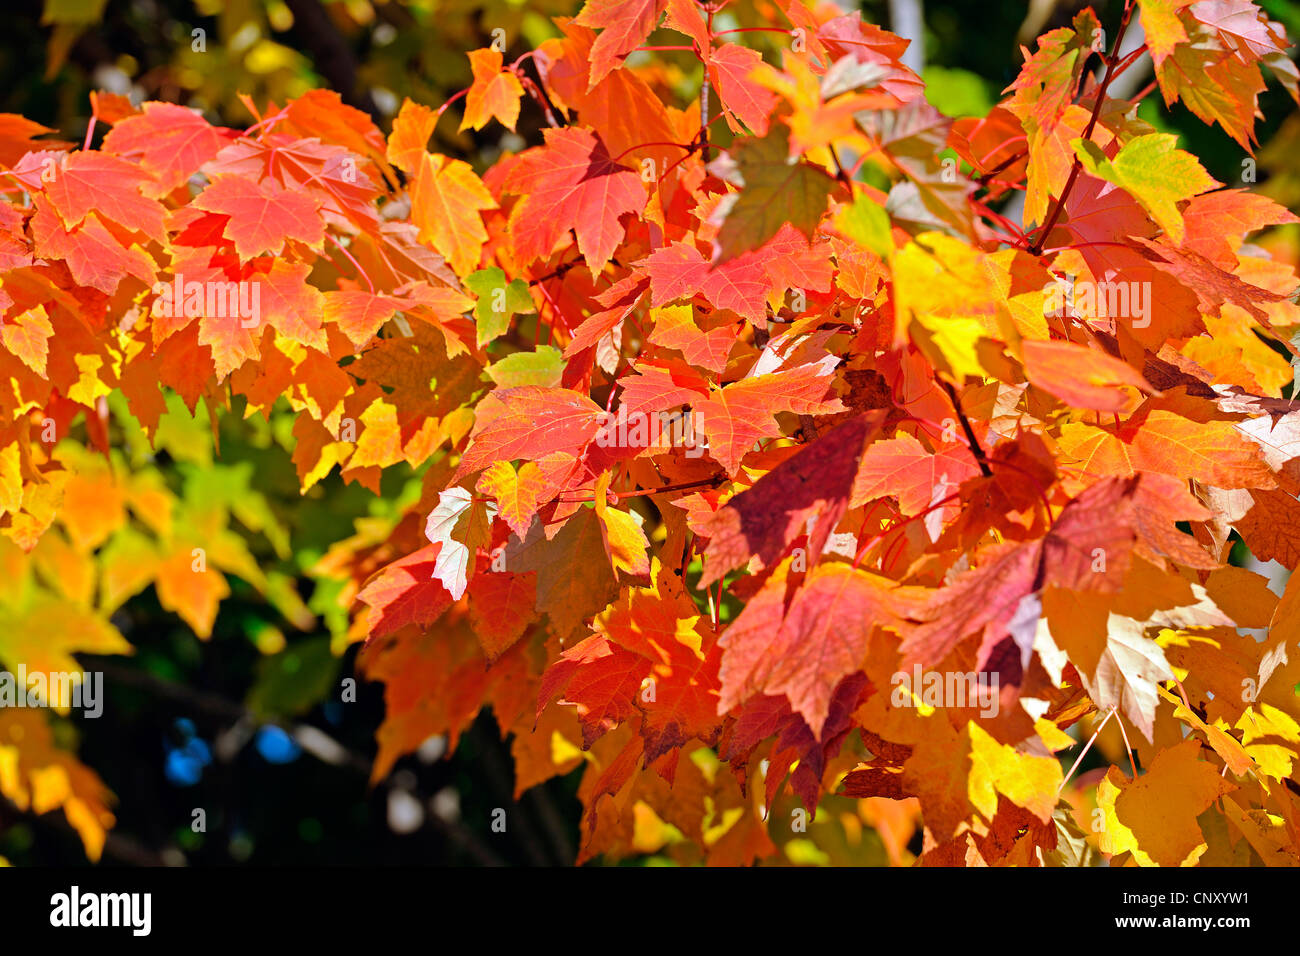 sycamore maple, great maple (Acer pseudoplatanus), autumn leafs, Germany Stock Photo